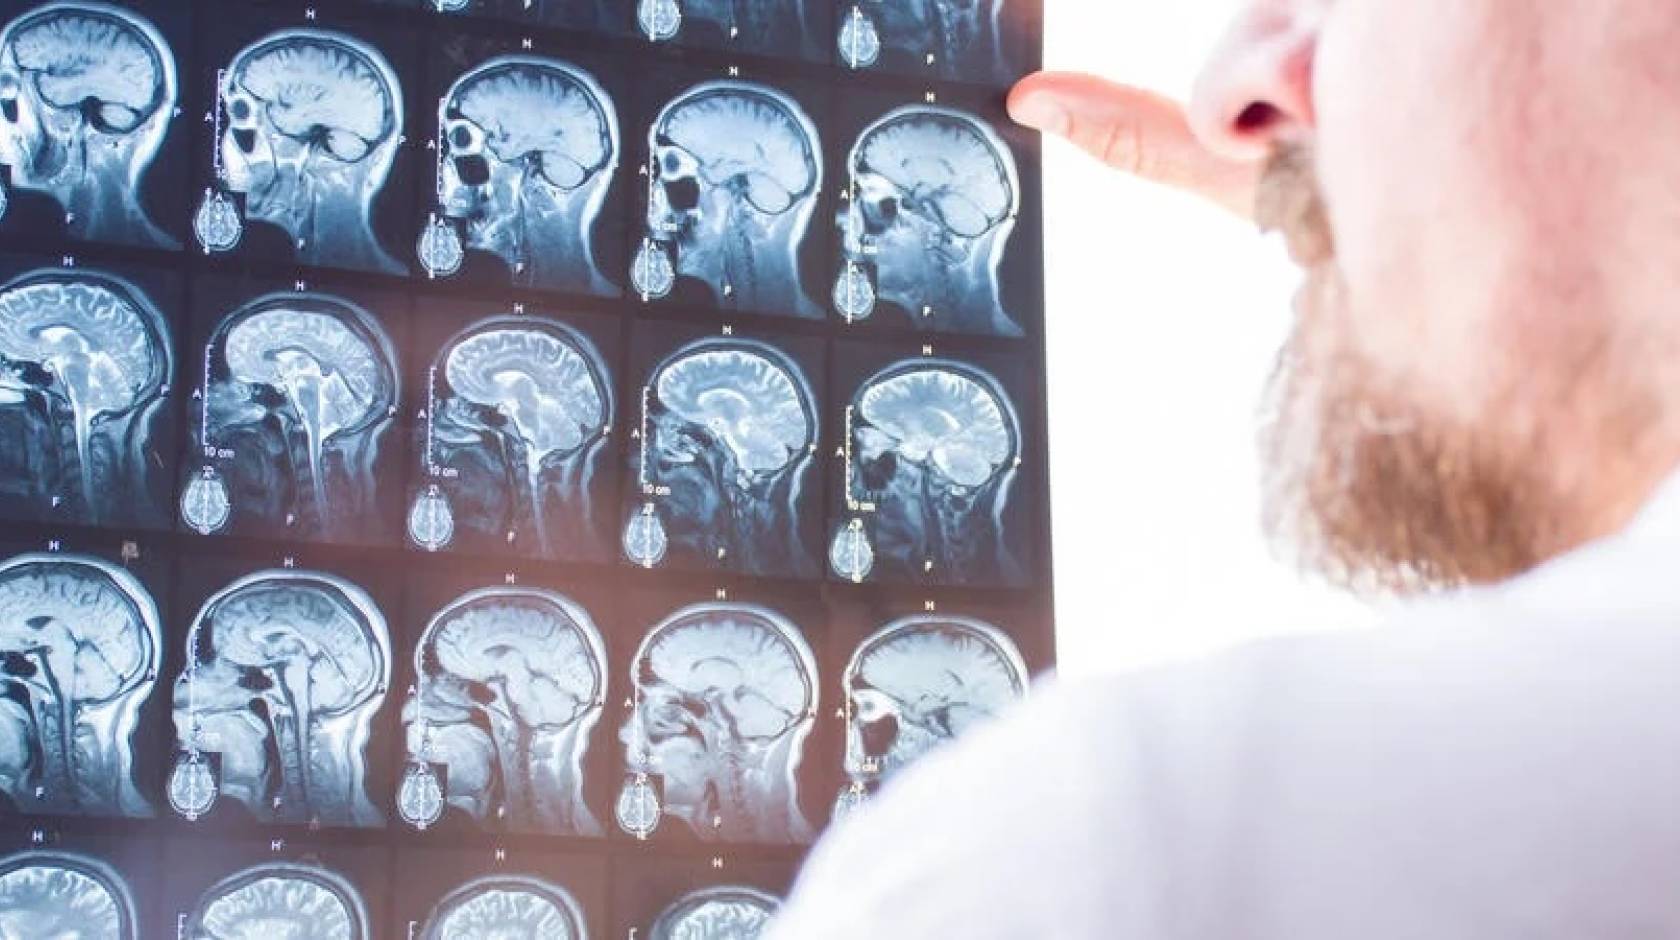 A shot over the shoulder from behind a bearded man wearing a white lab coat, holding a grid of brain scans up to a light wall to inspect them